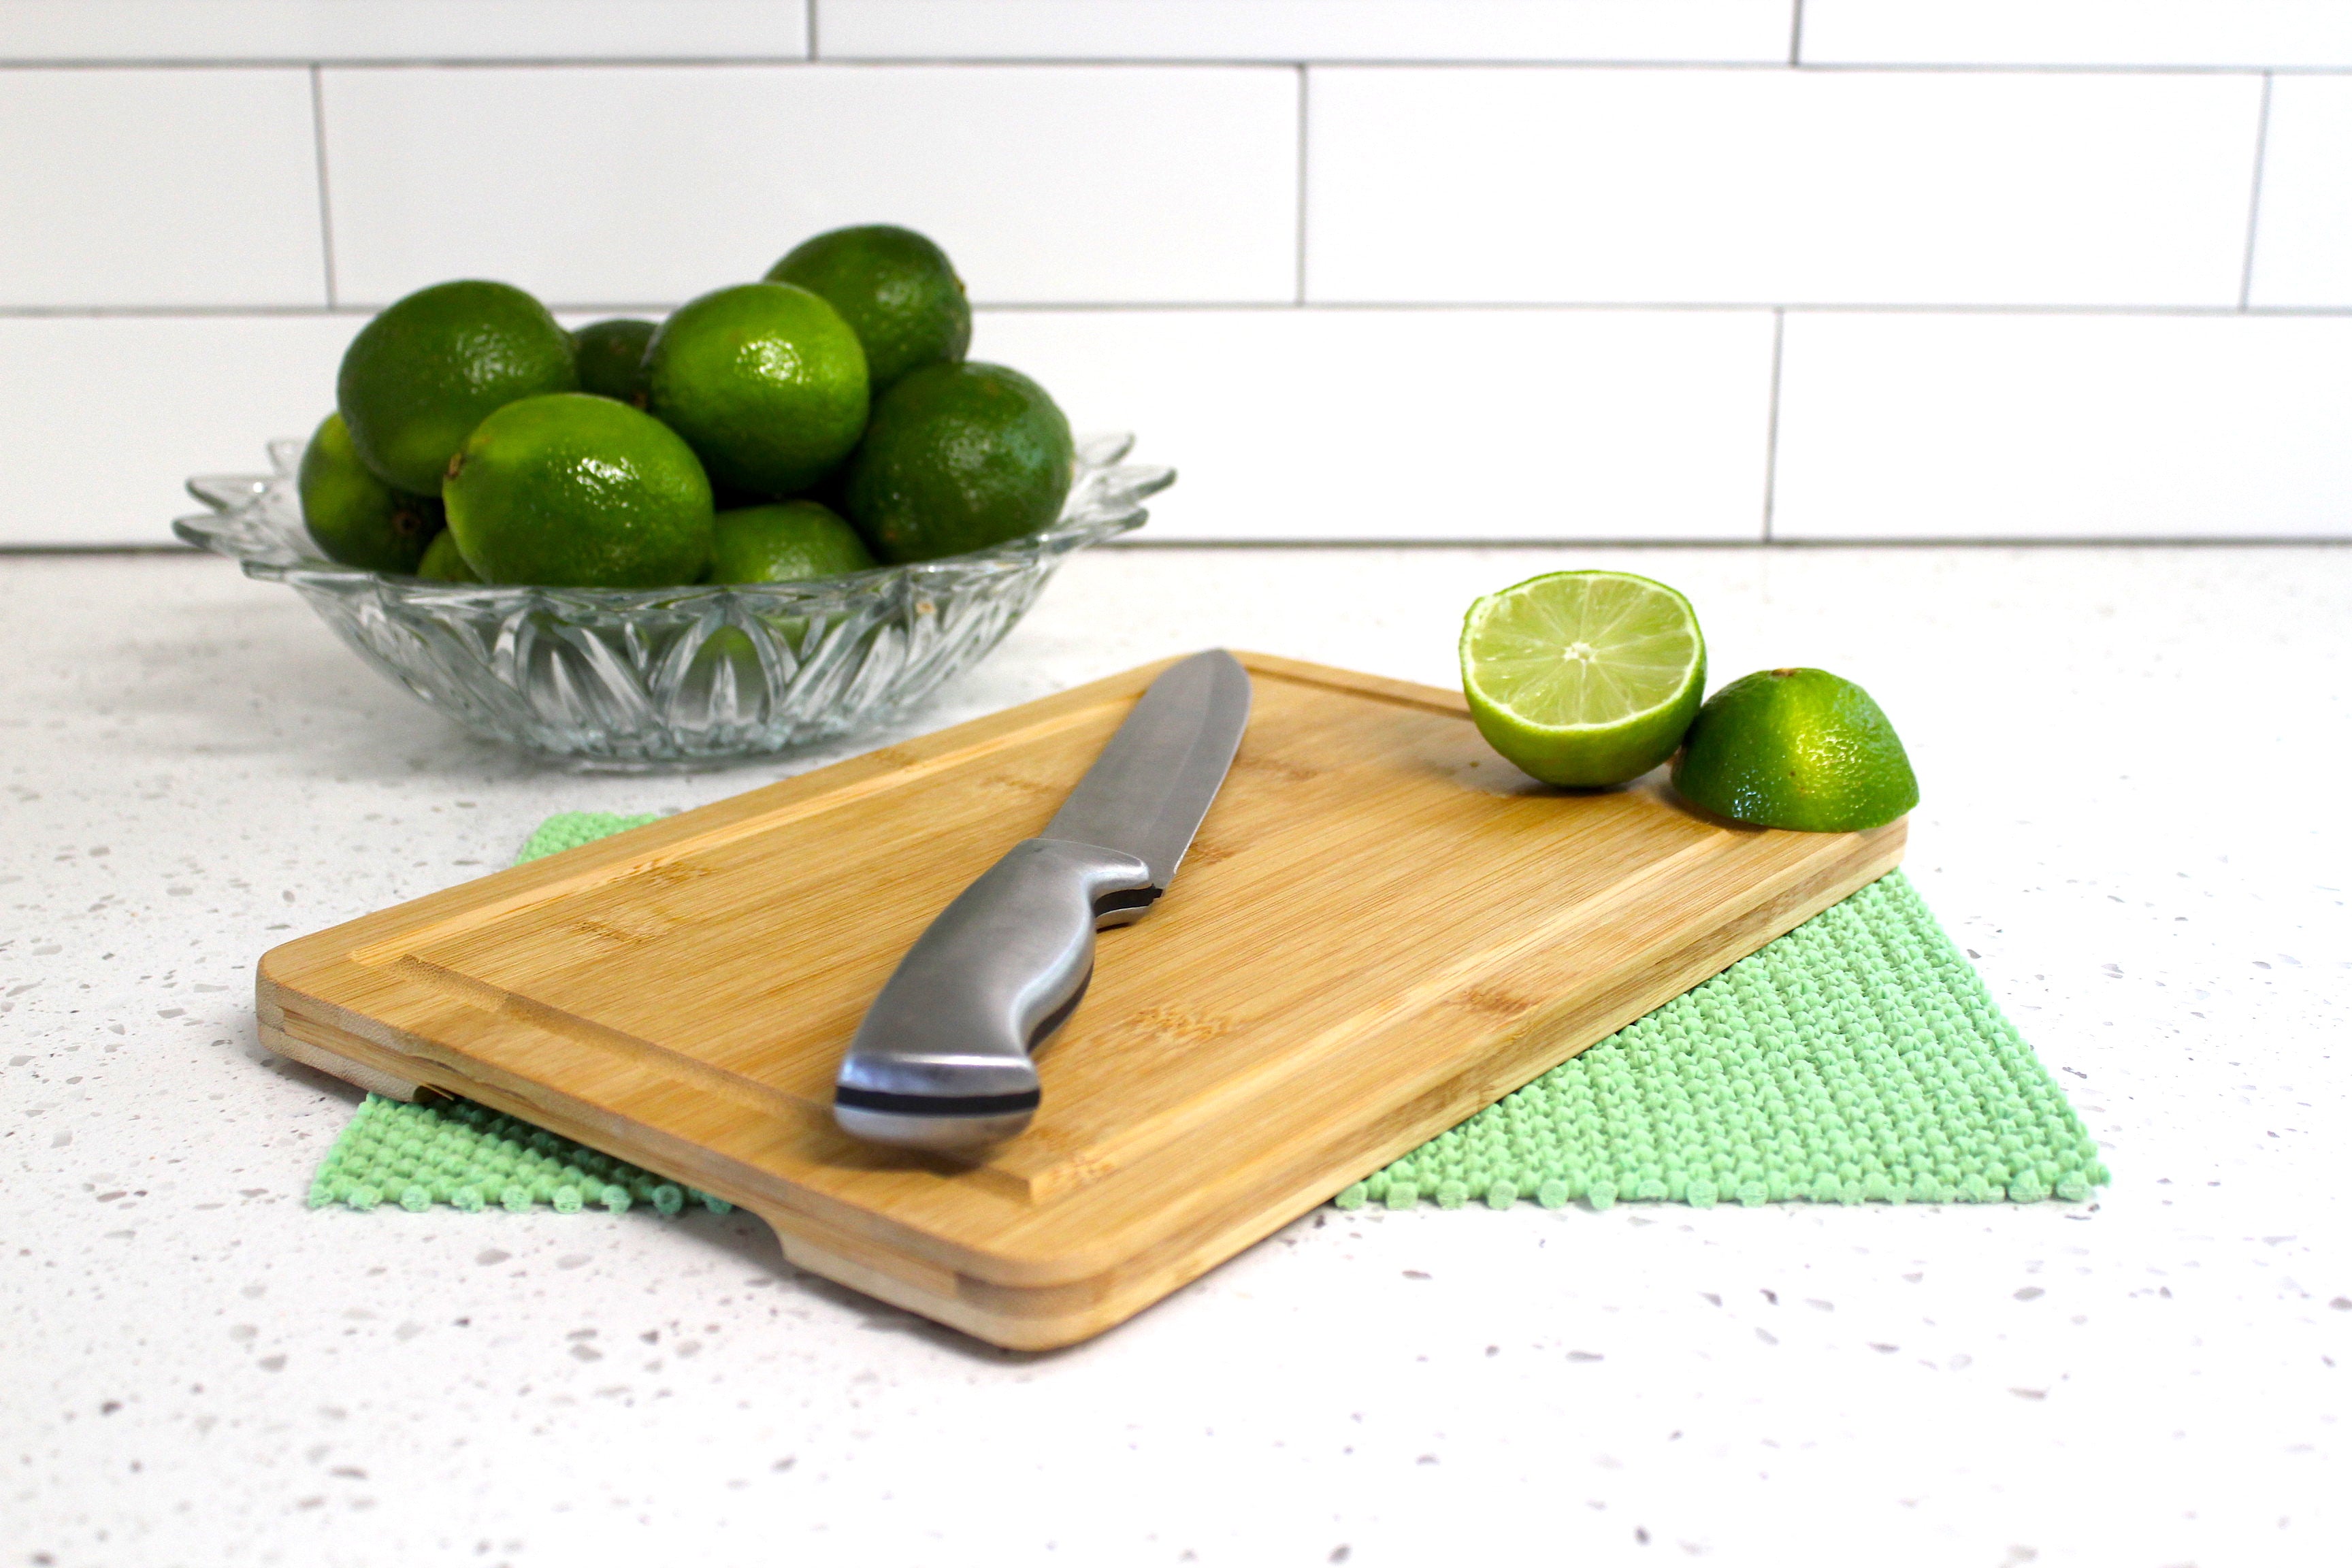 Resort Chef International Non-Slip Safety Mat for Under Kitchen Cutting Boards - Hygienic Non-Absorbent and Dishwasher Safe